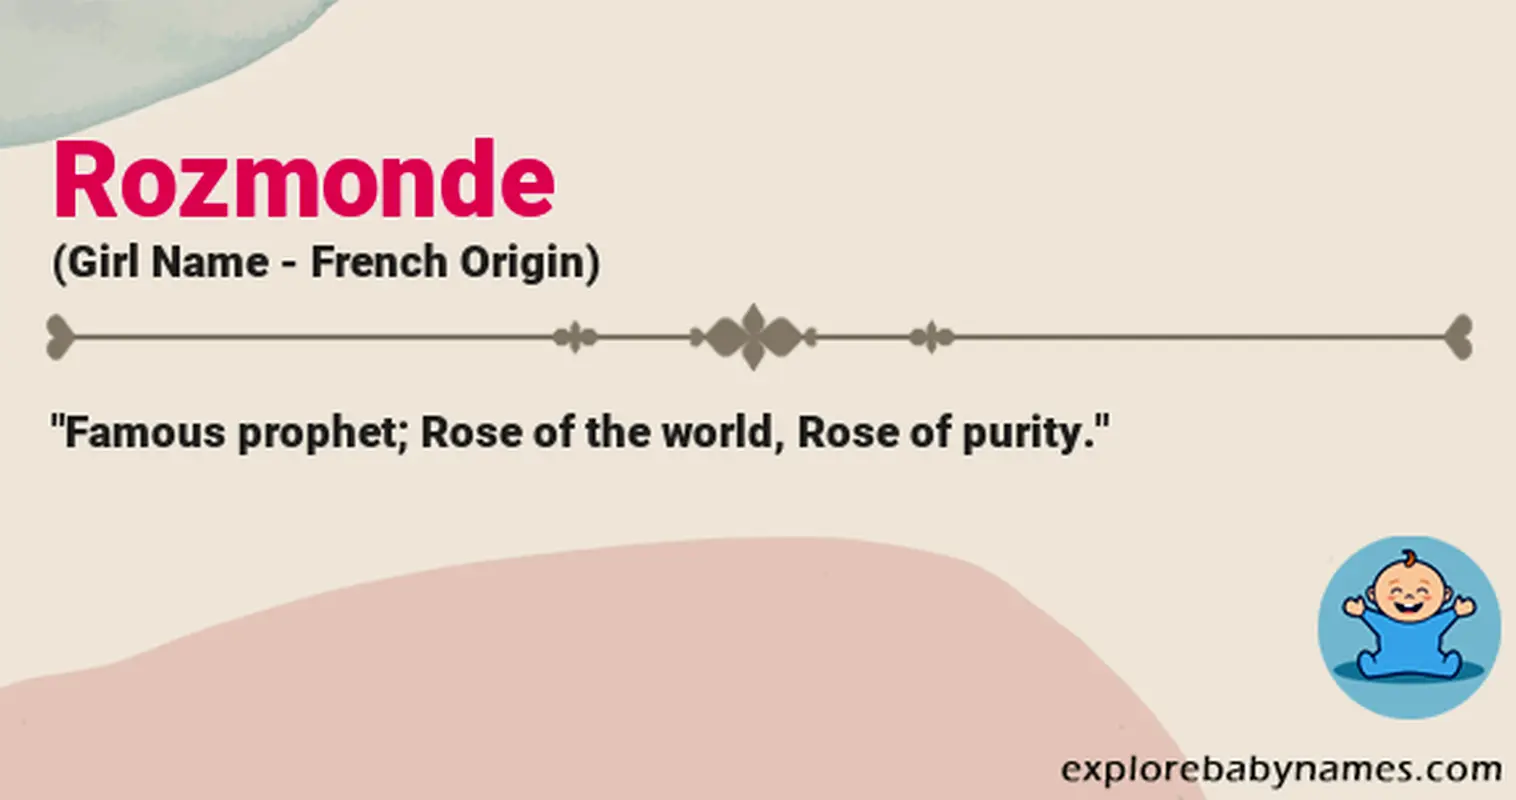 Meaning of Rozmonde